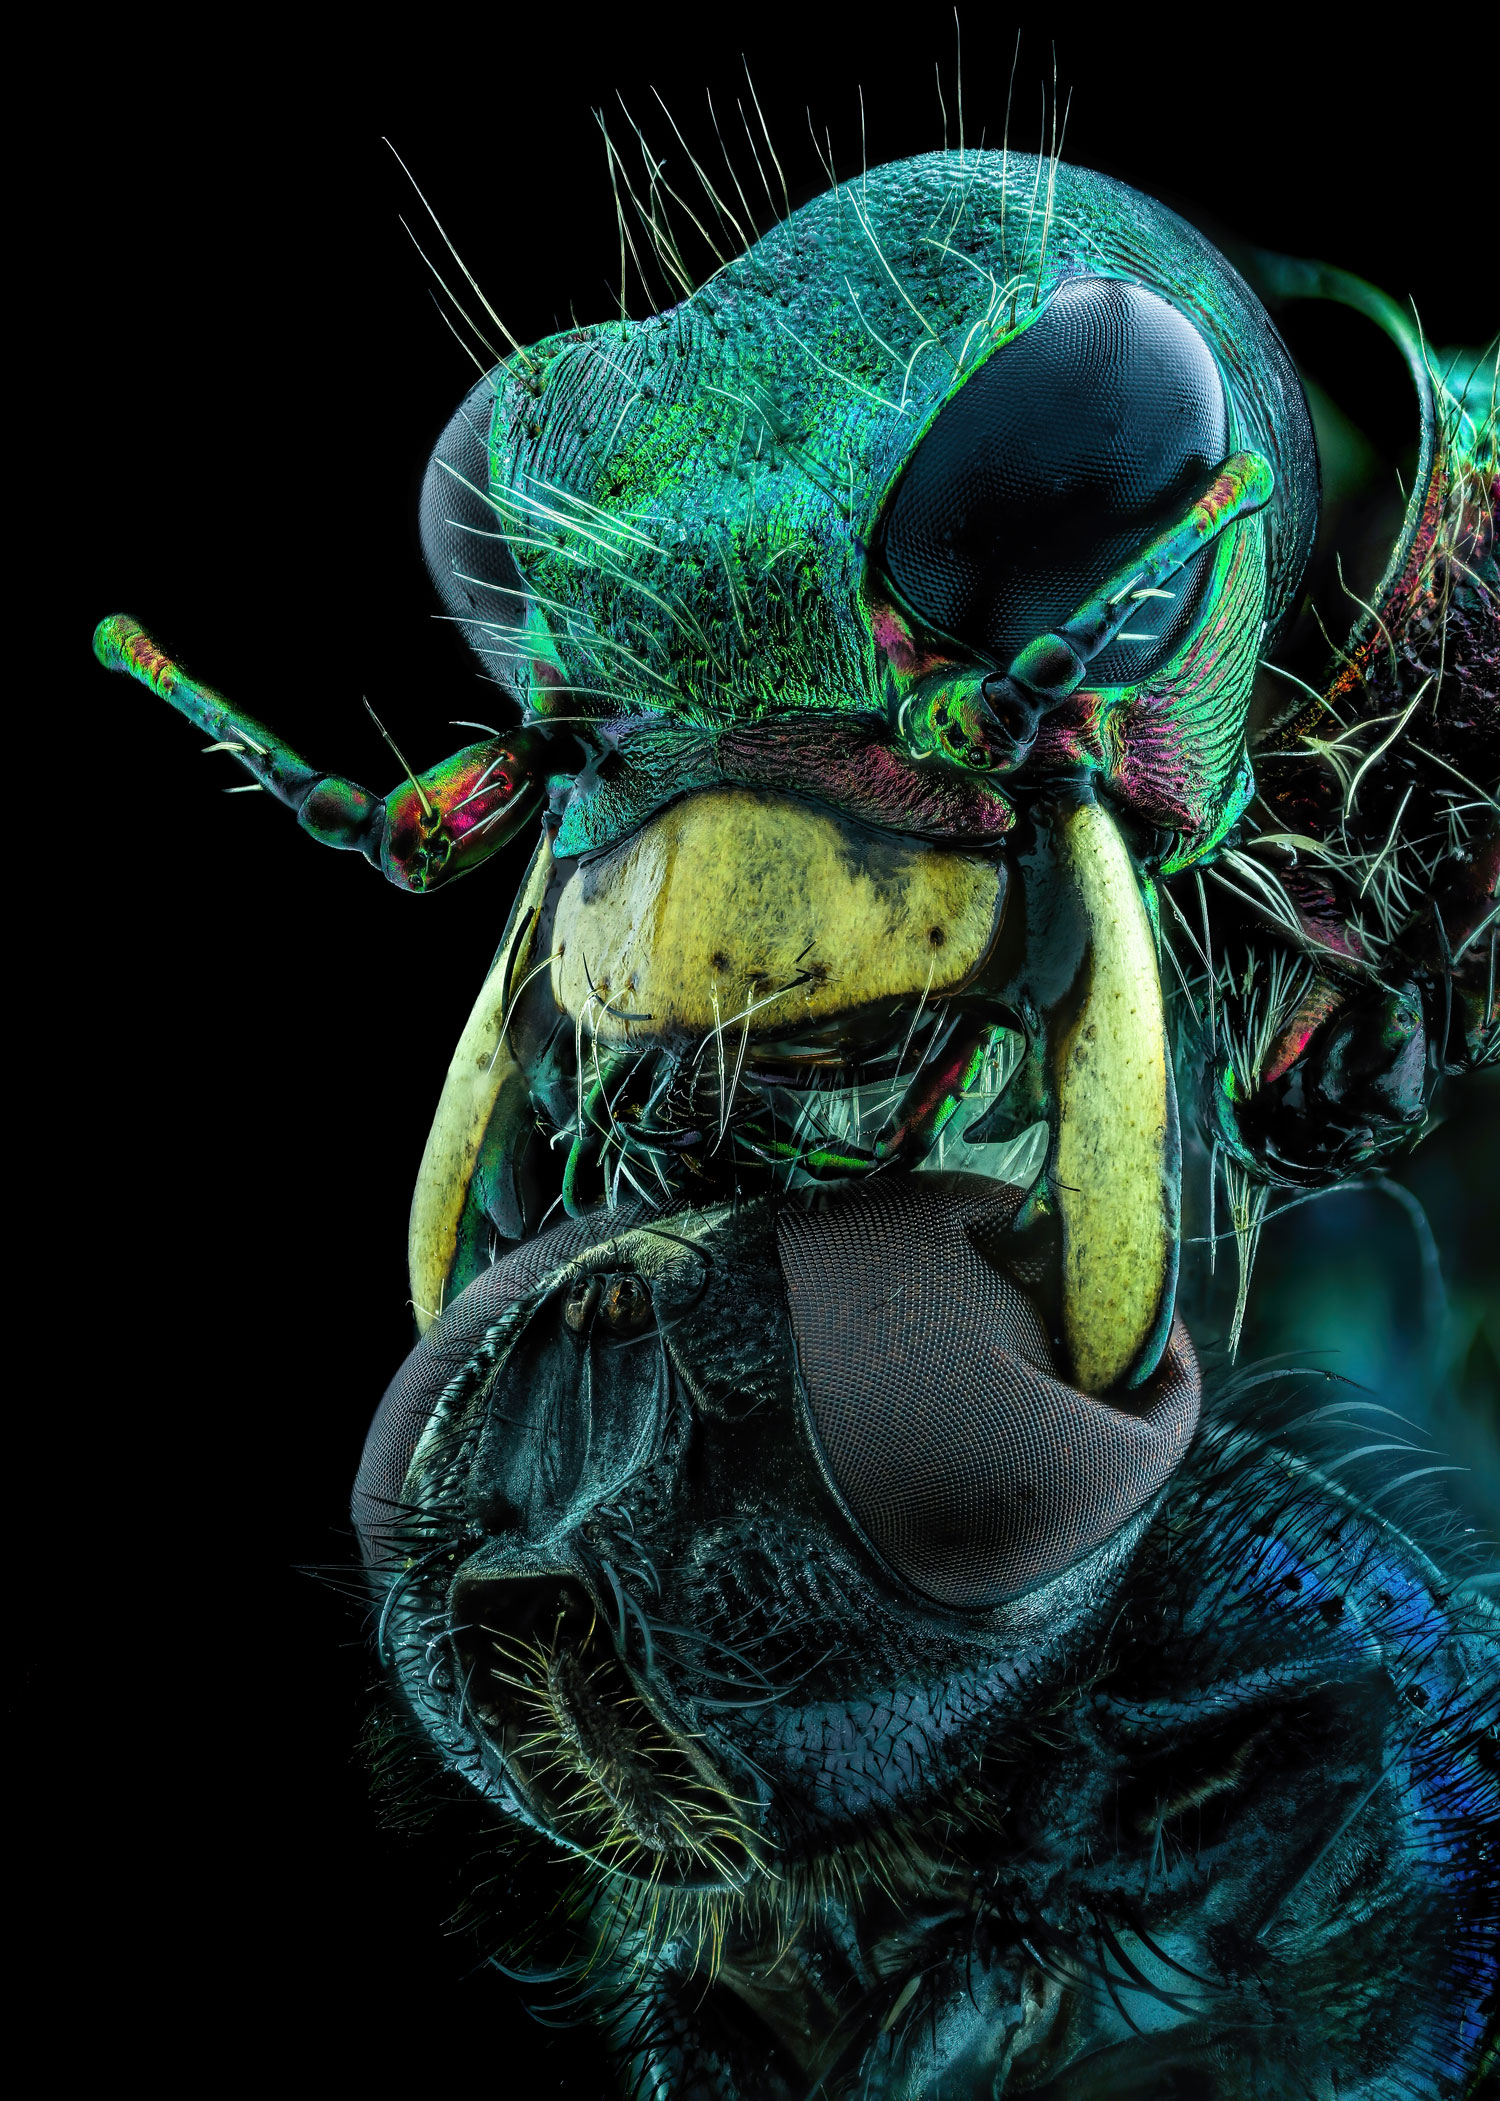 the face of a tiger beetle holding a fly under its chin.  The beetle is depicted in bright greens and yellows, with huge dark eyes